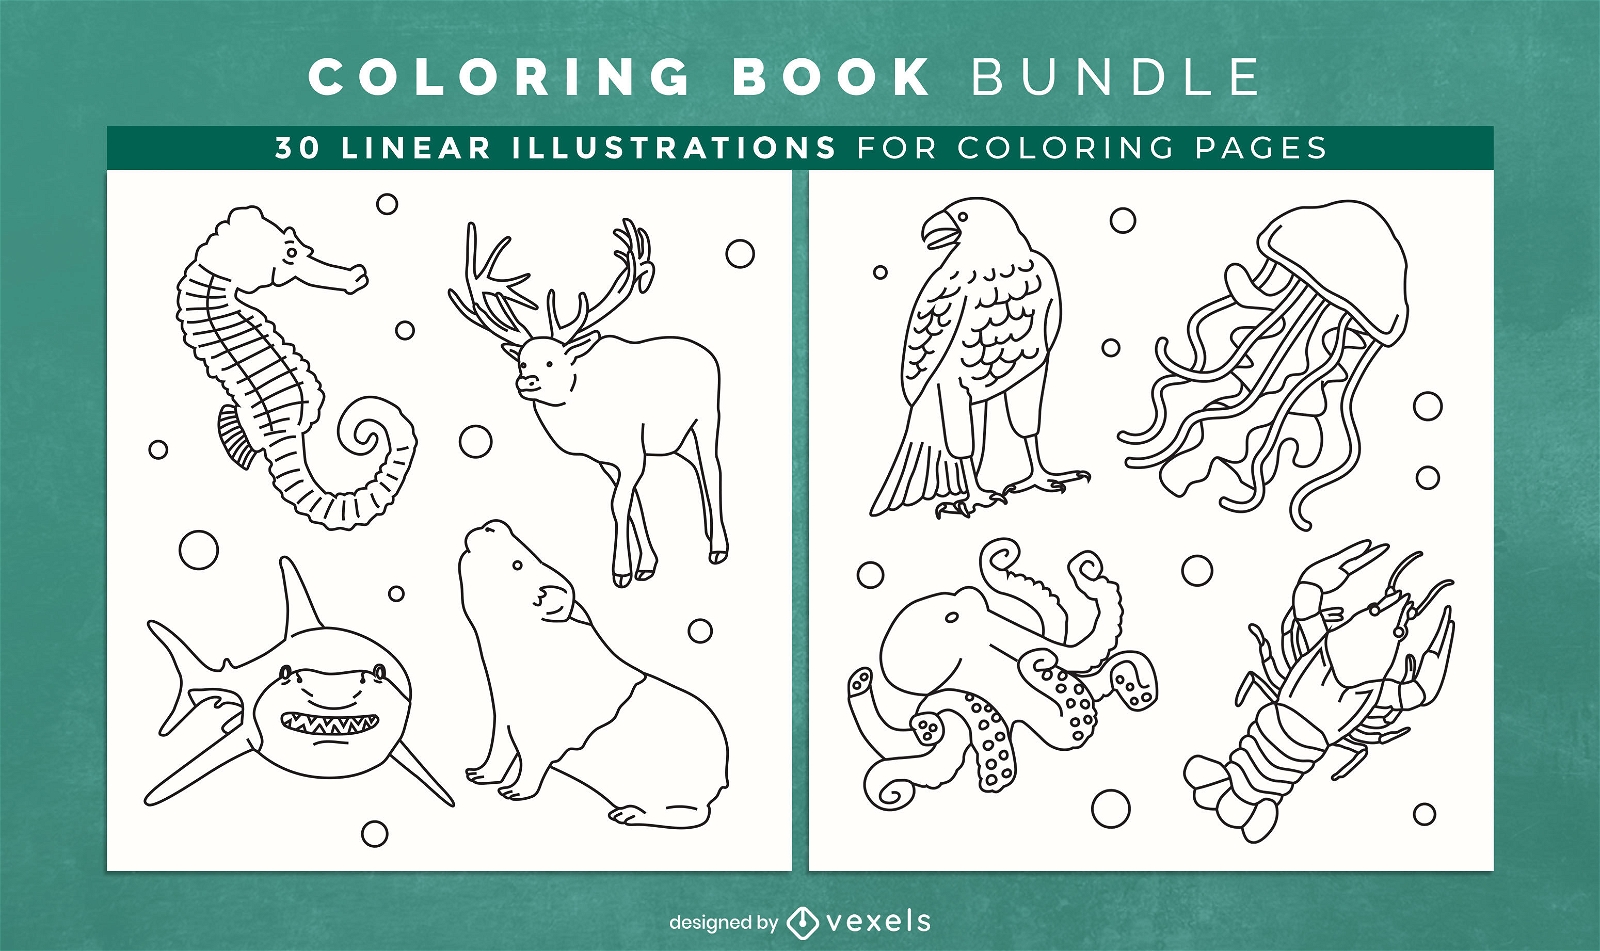 Animal wildlife coloring book pages design